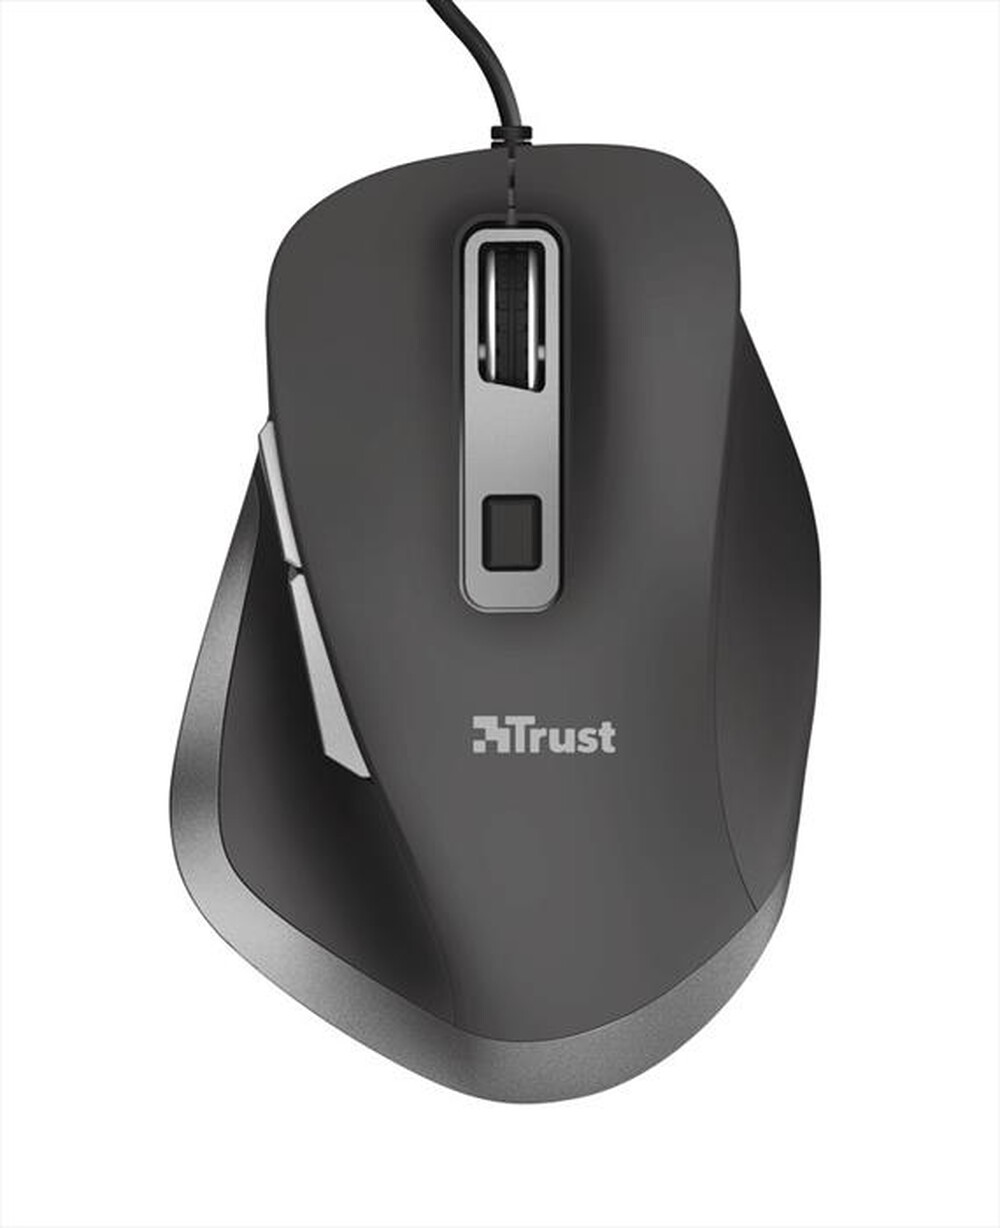 "TRUST - FYDA WIRED MOUSE-Black/Grey"